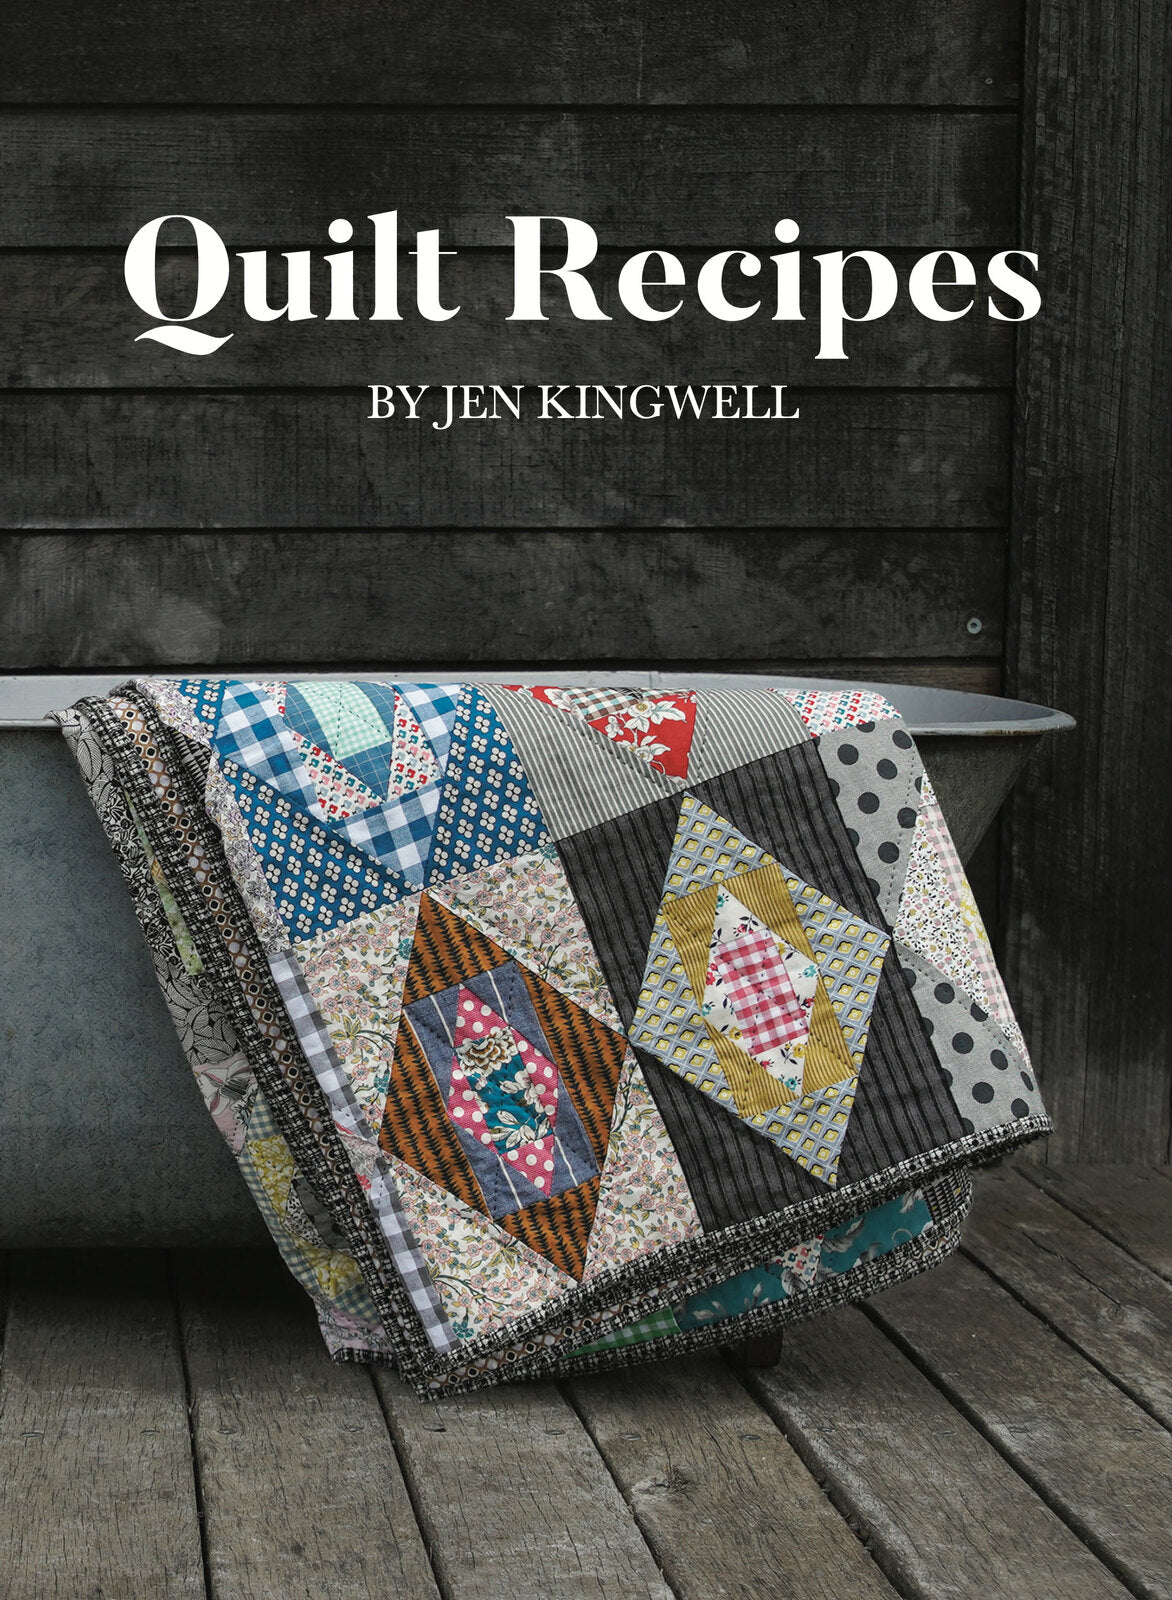 Book - Quilt Recipes by Jen Kingwell